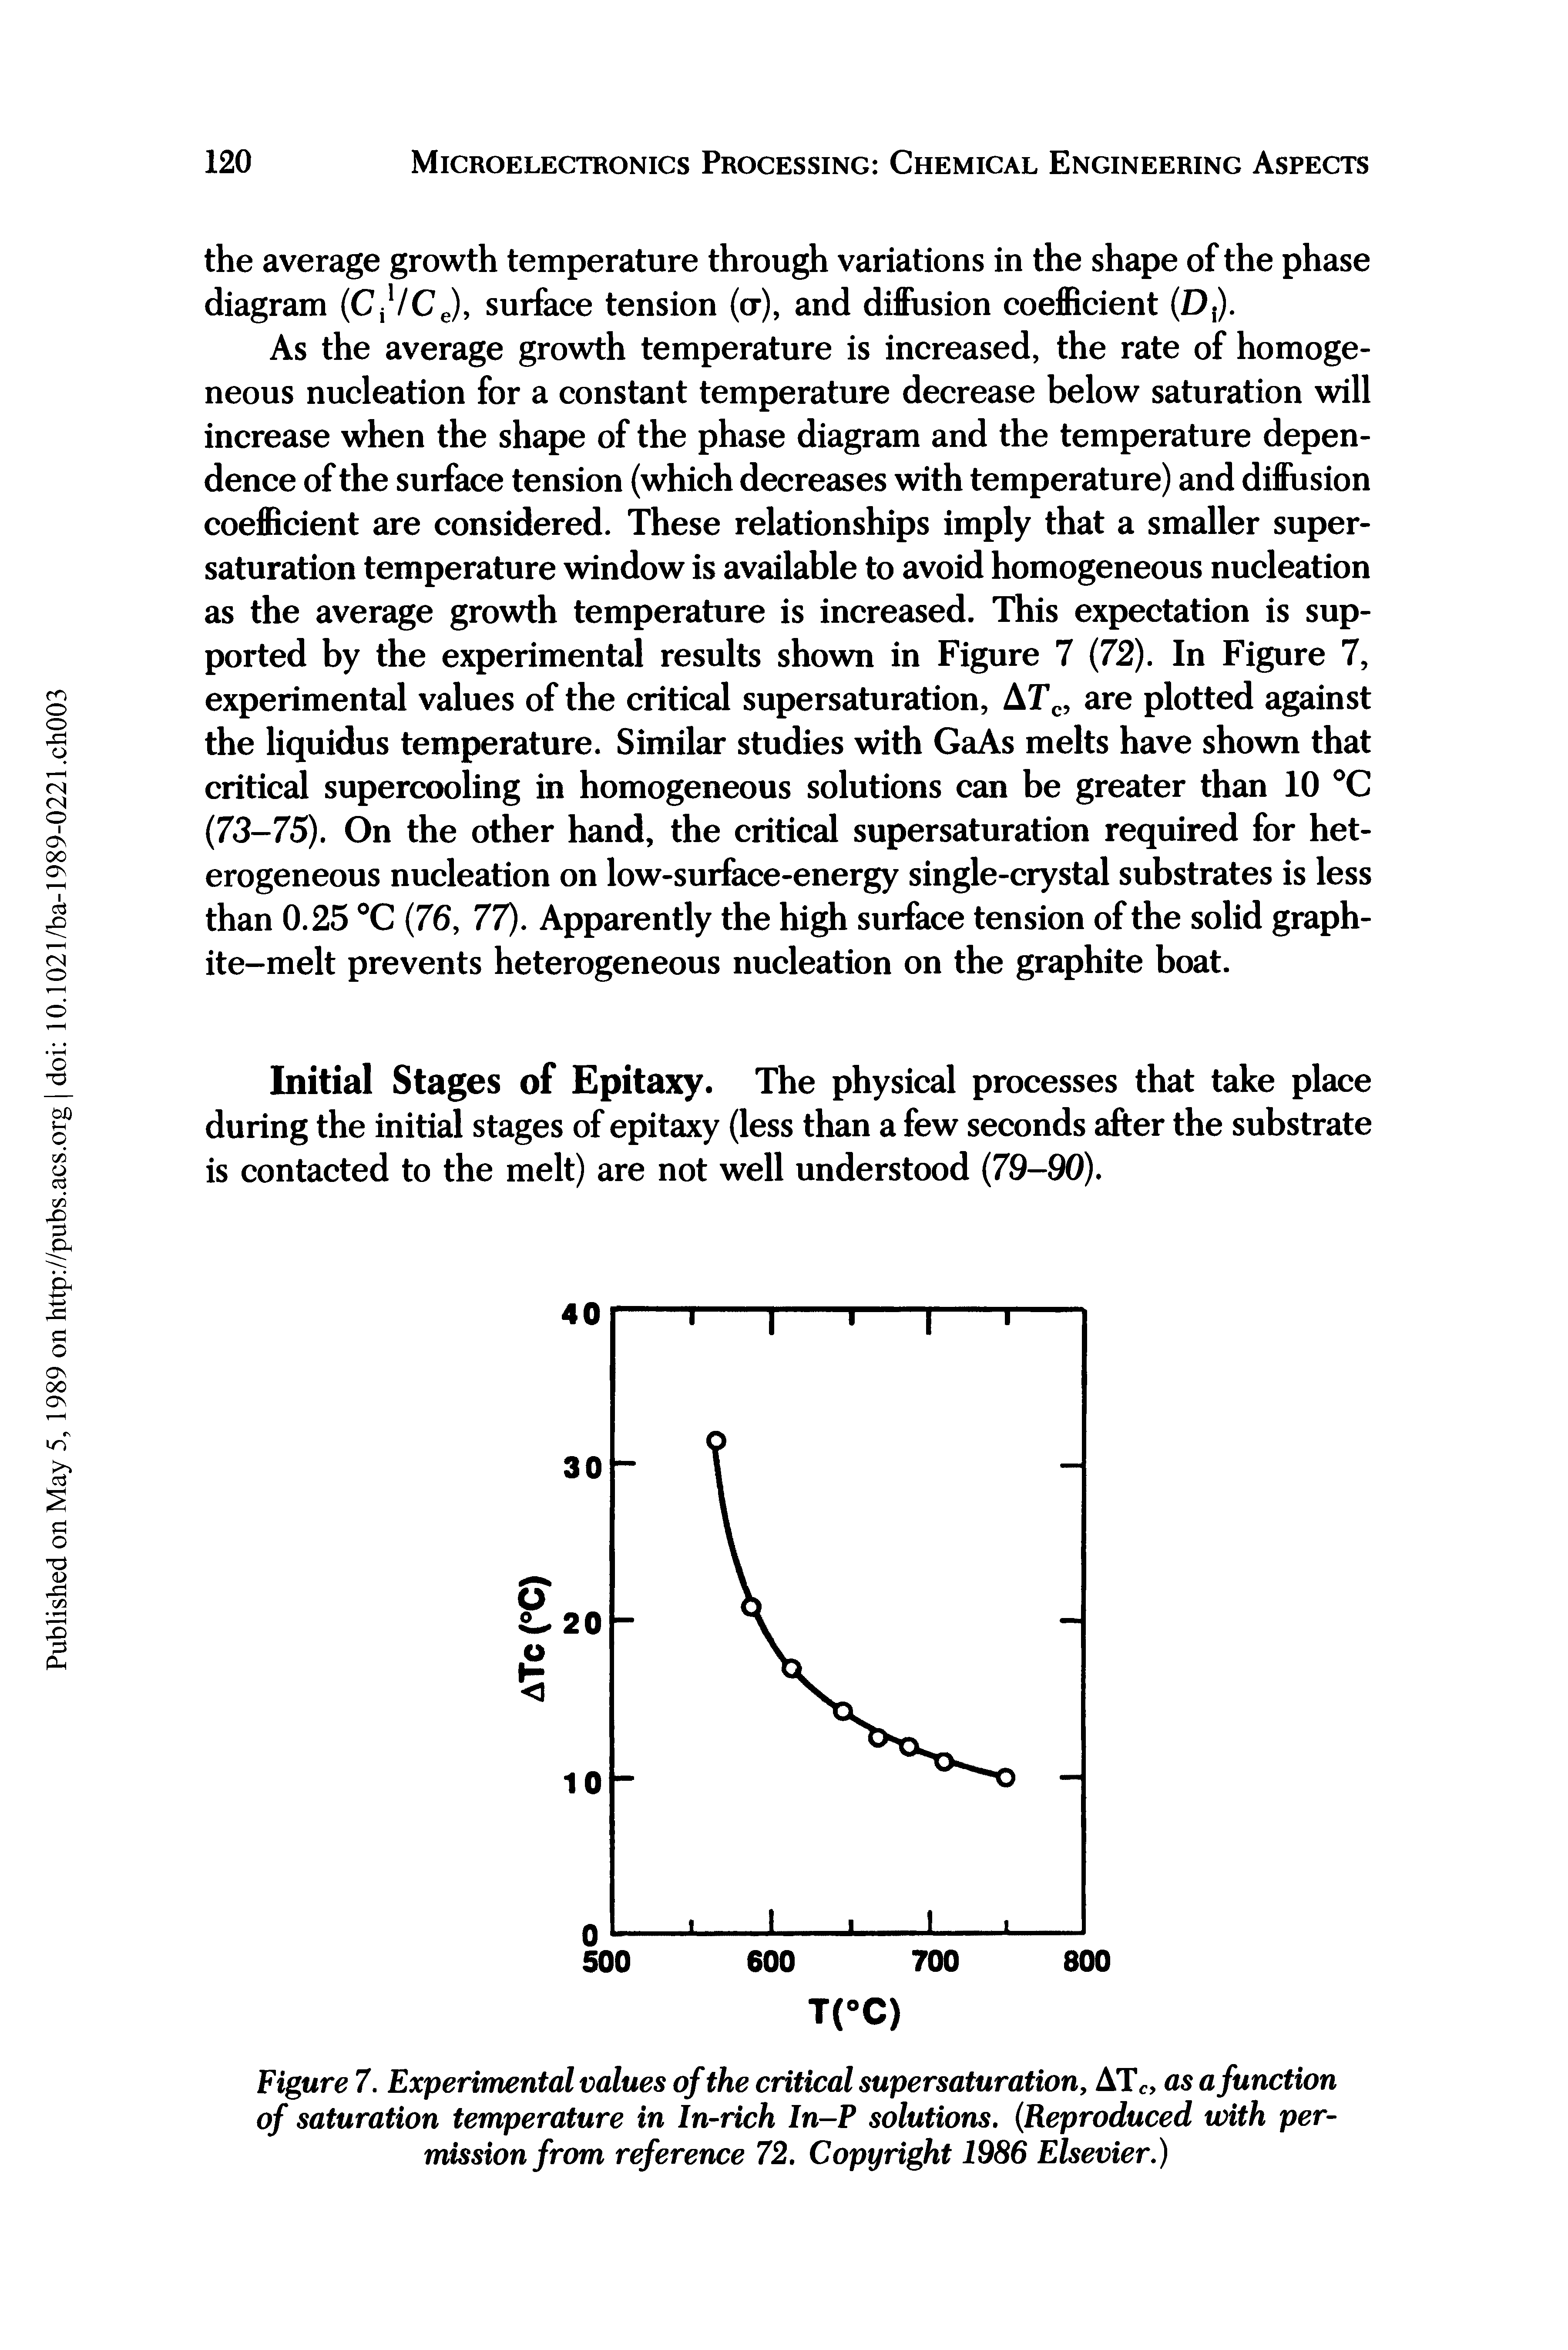 Figure 7. Experimental values of the critical supersaturation, ATC, as a function of saturation temperature in In-rich In-P solutions. (Reproduced with permission from reference 72. Copyright 1986 Elsevier.)...